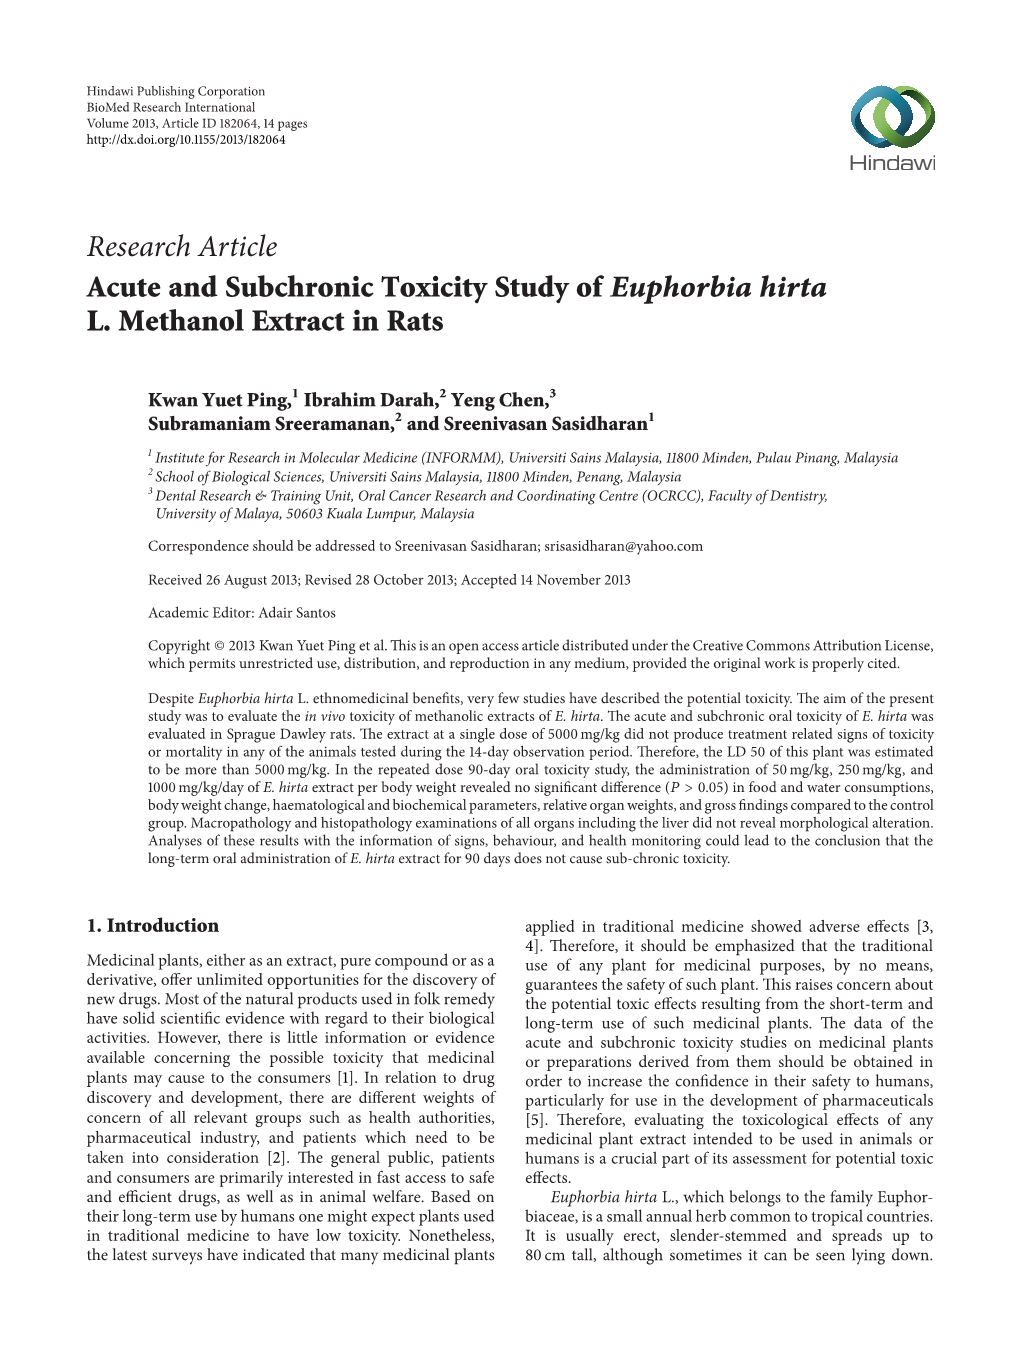 Acute and Subchronic Toxicity Study of Euphorbia Hirta L. Methanol Extract in Rats